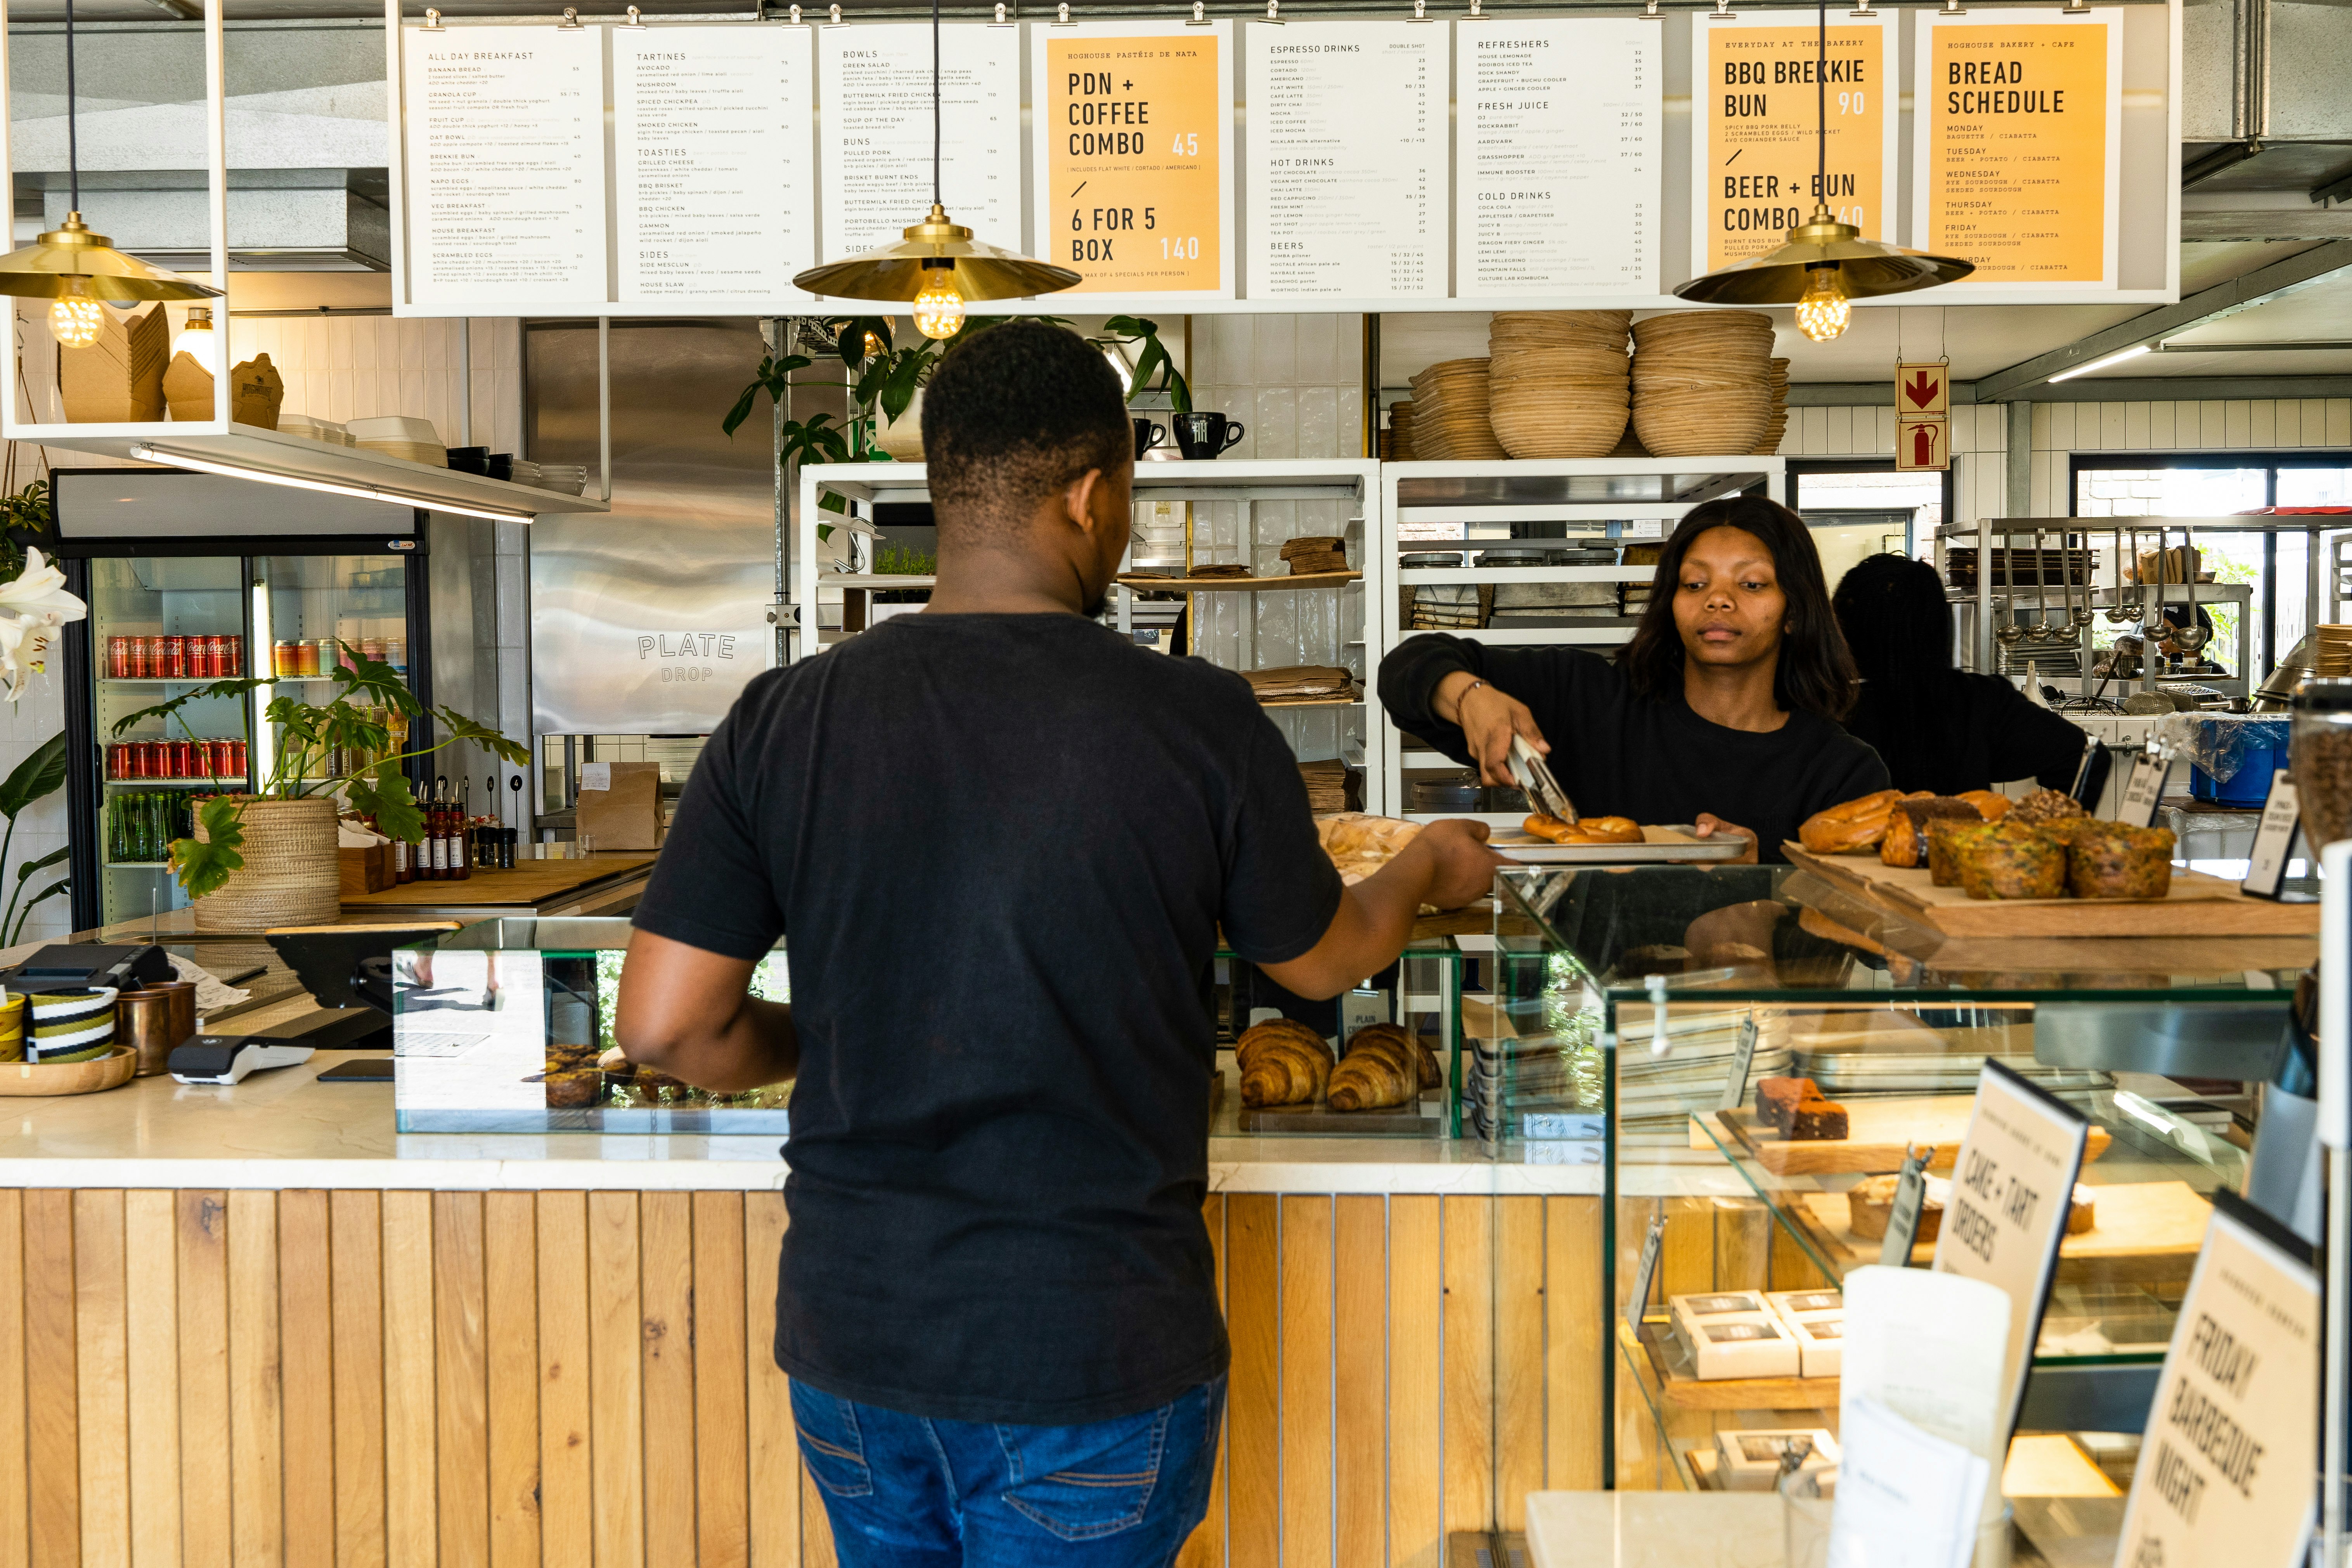 A woman serves a man at the Hoghouse Bakery in Cape Town, South Africa